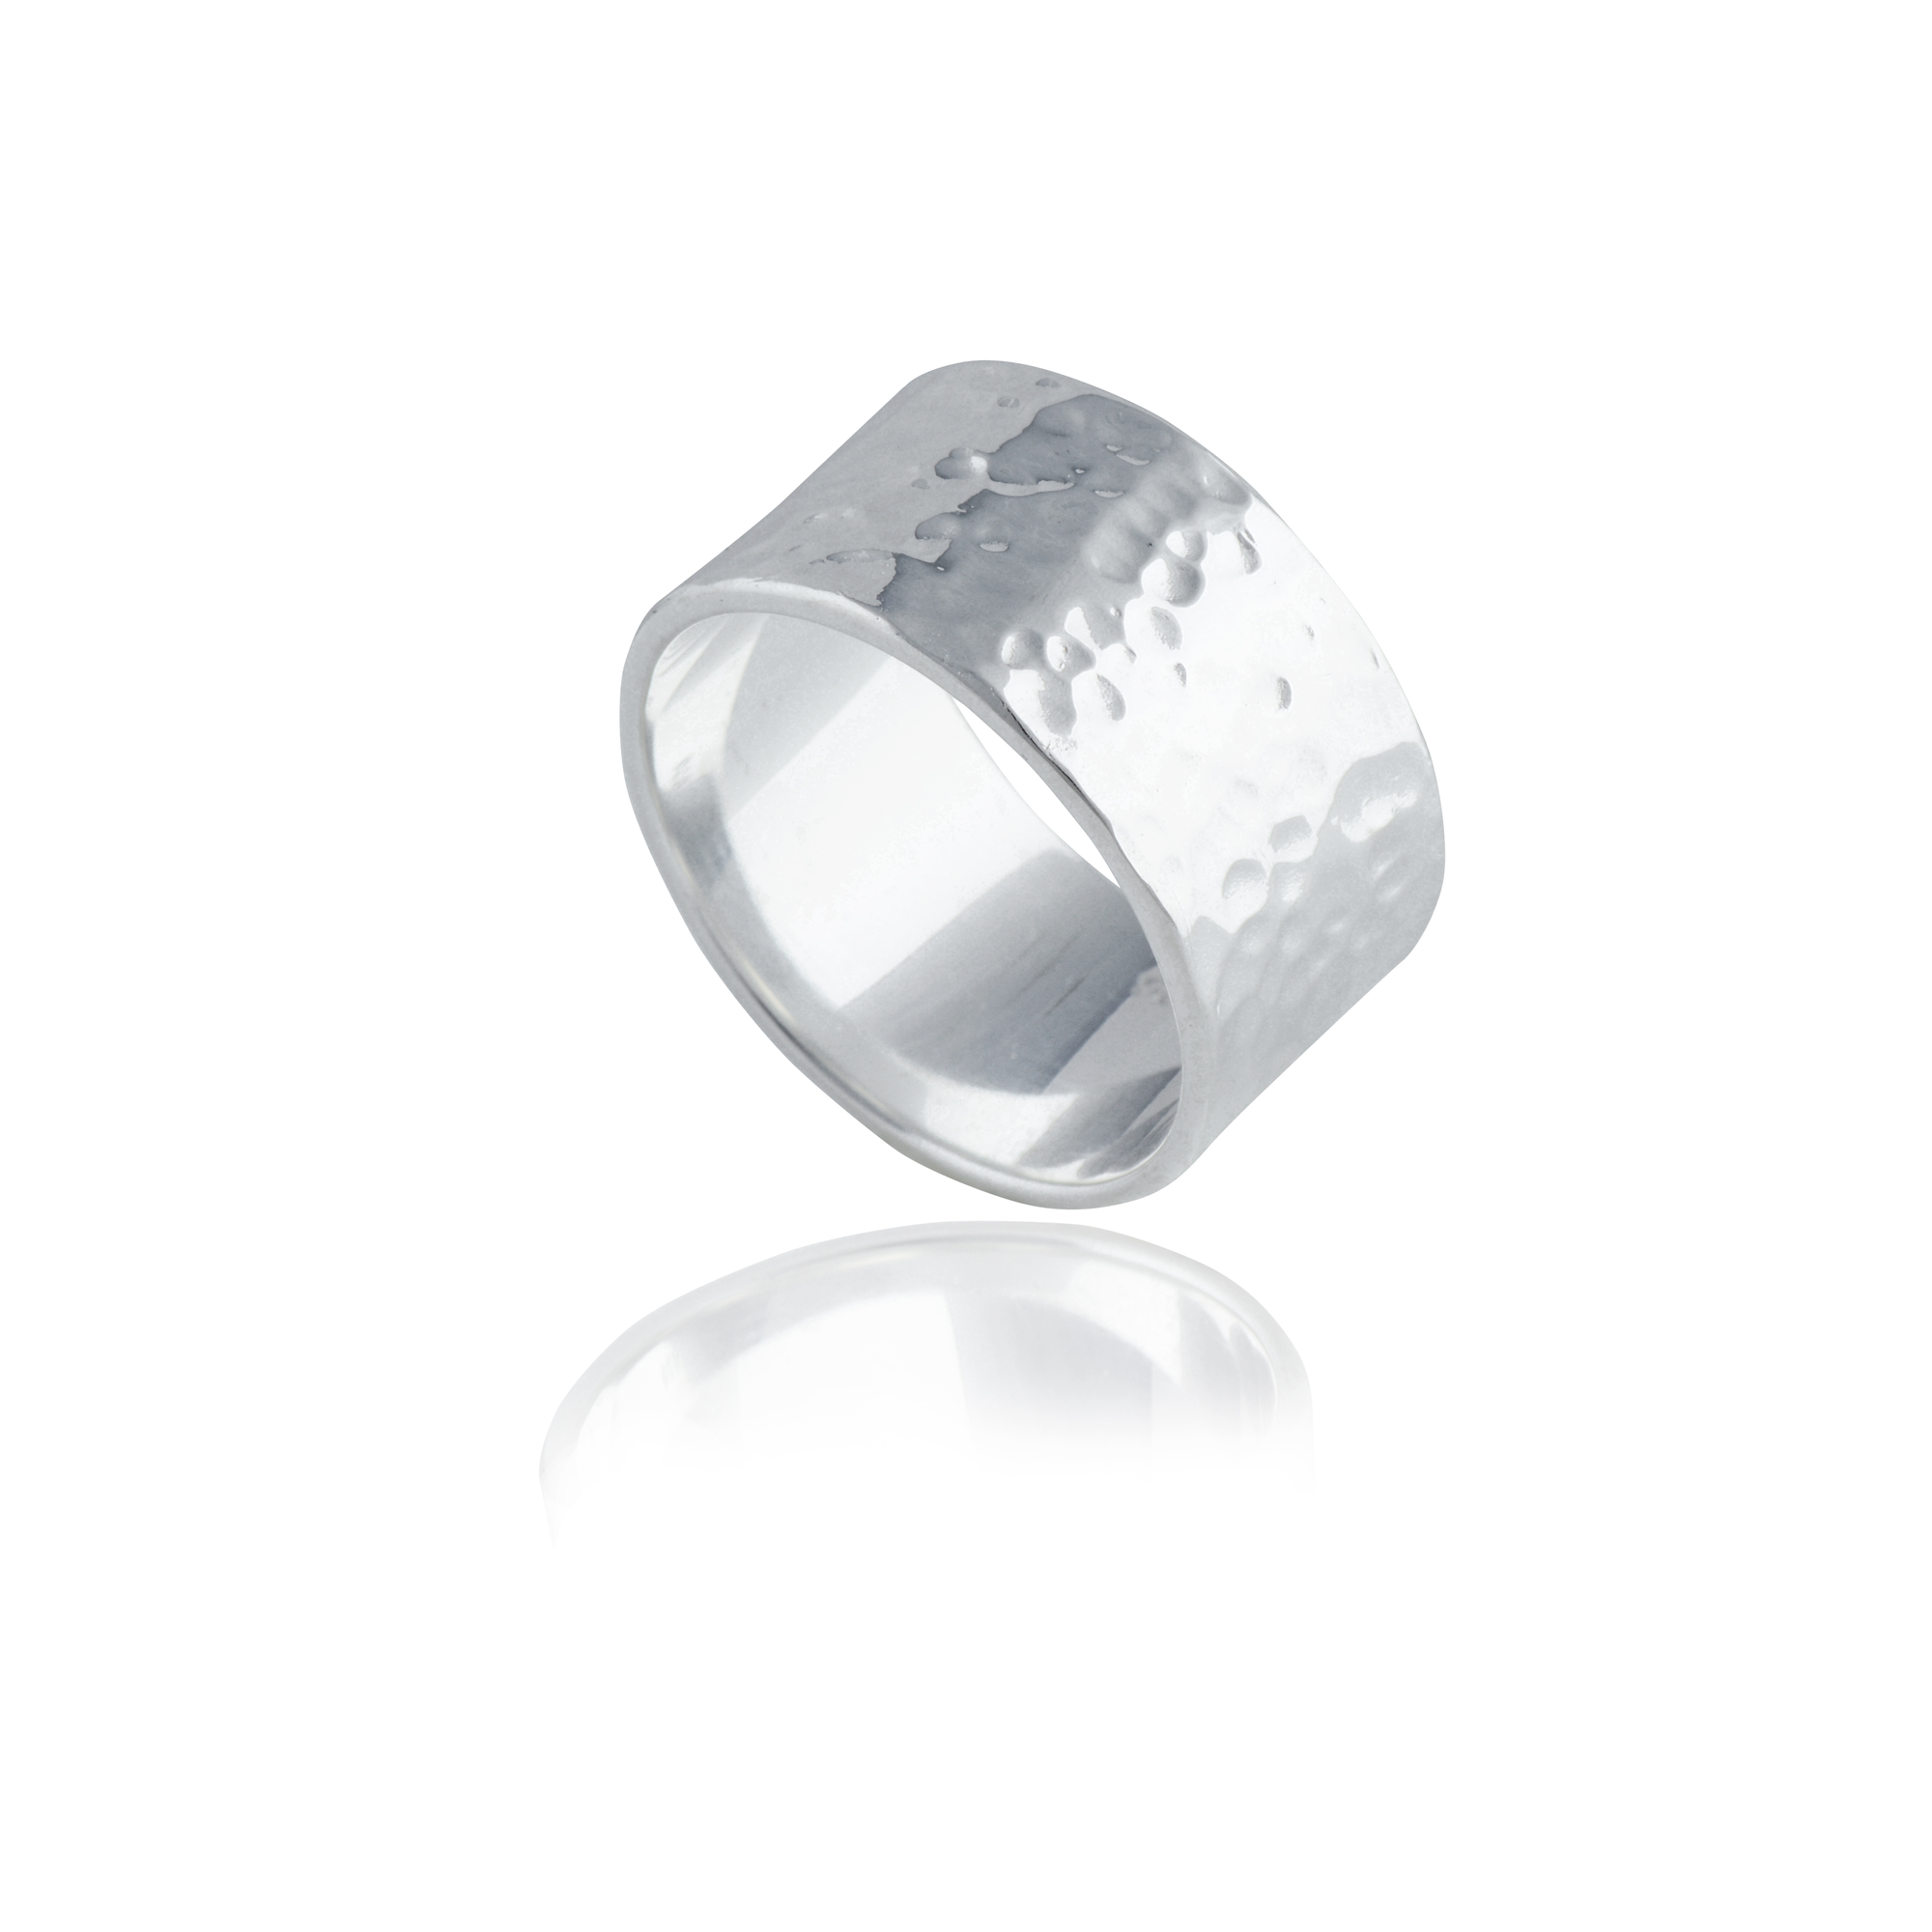 MOMA Hammered Ring 10mm - Silver